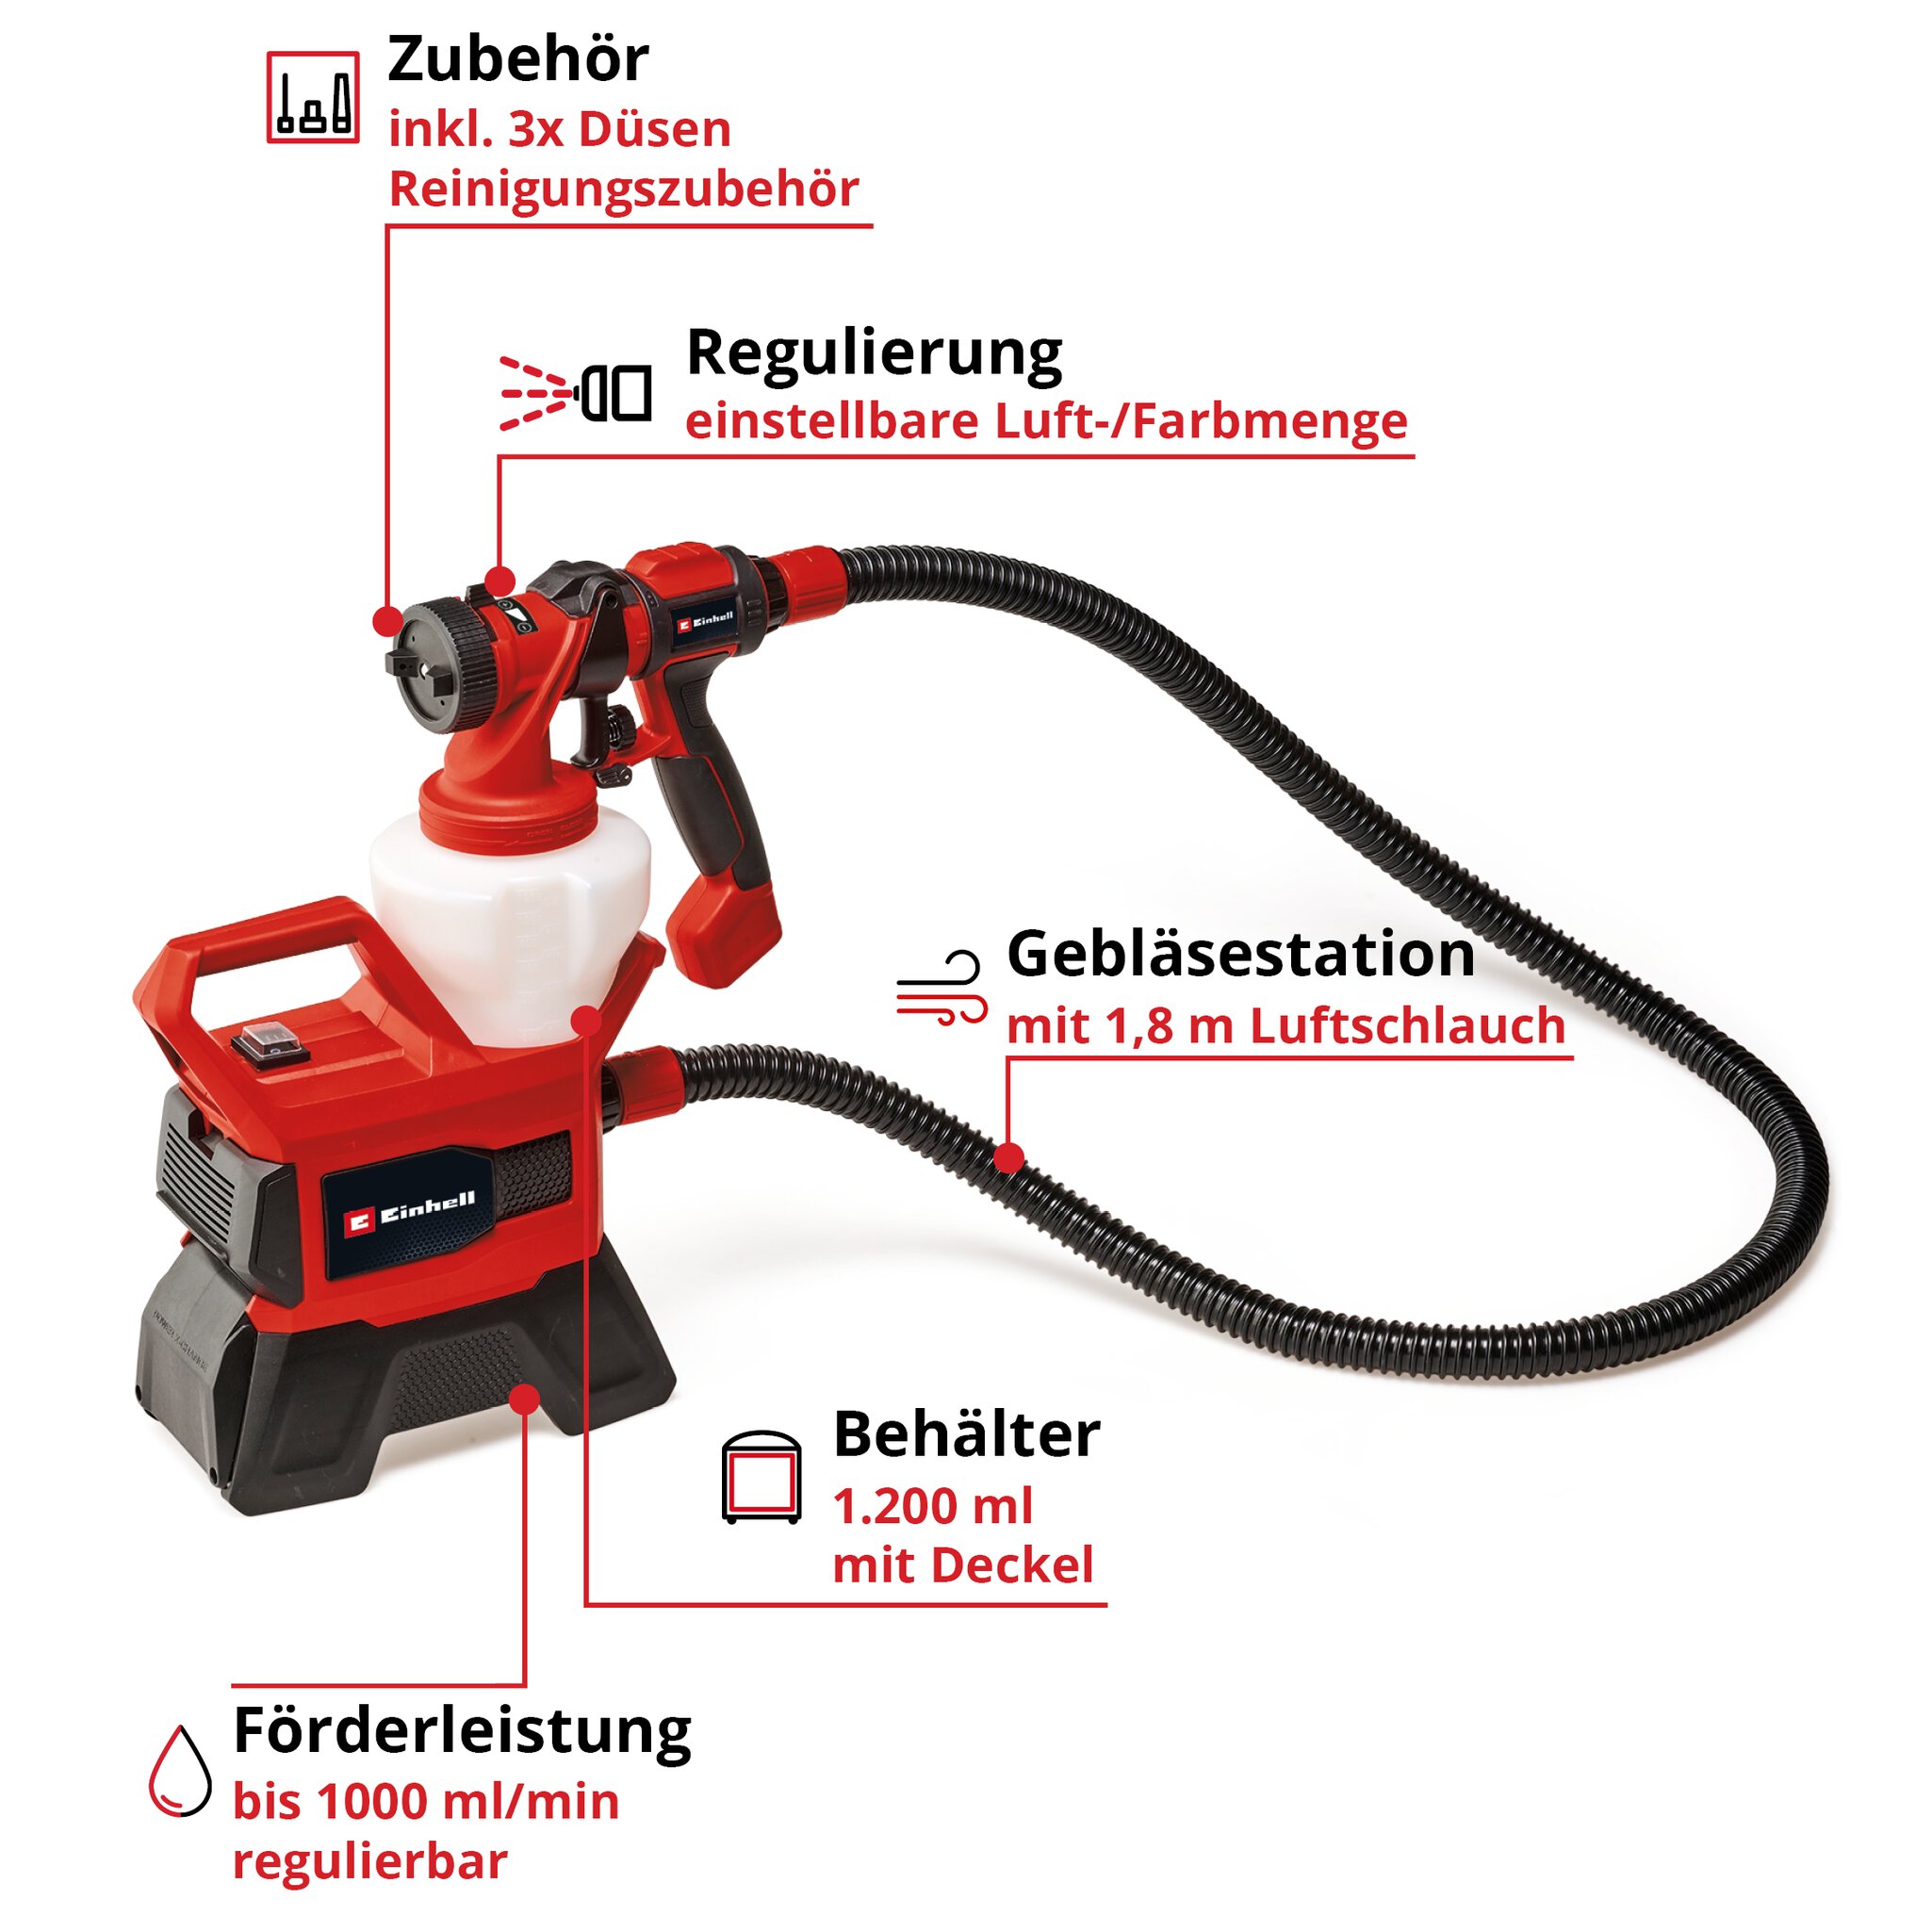 einhell-expert-cordless-paint-spray-system-4260040-key_feature_image-001